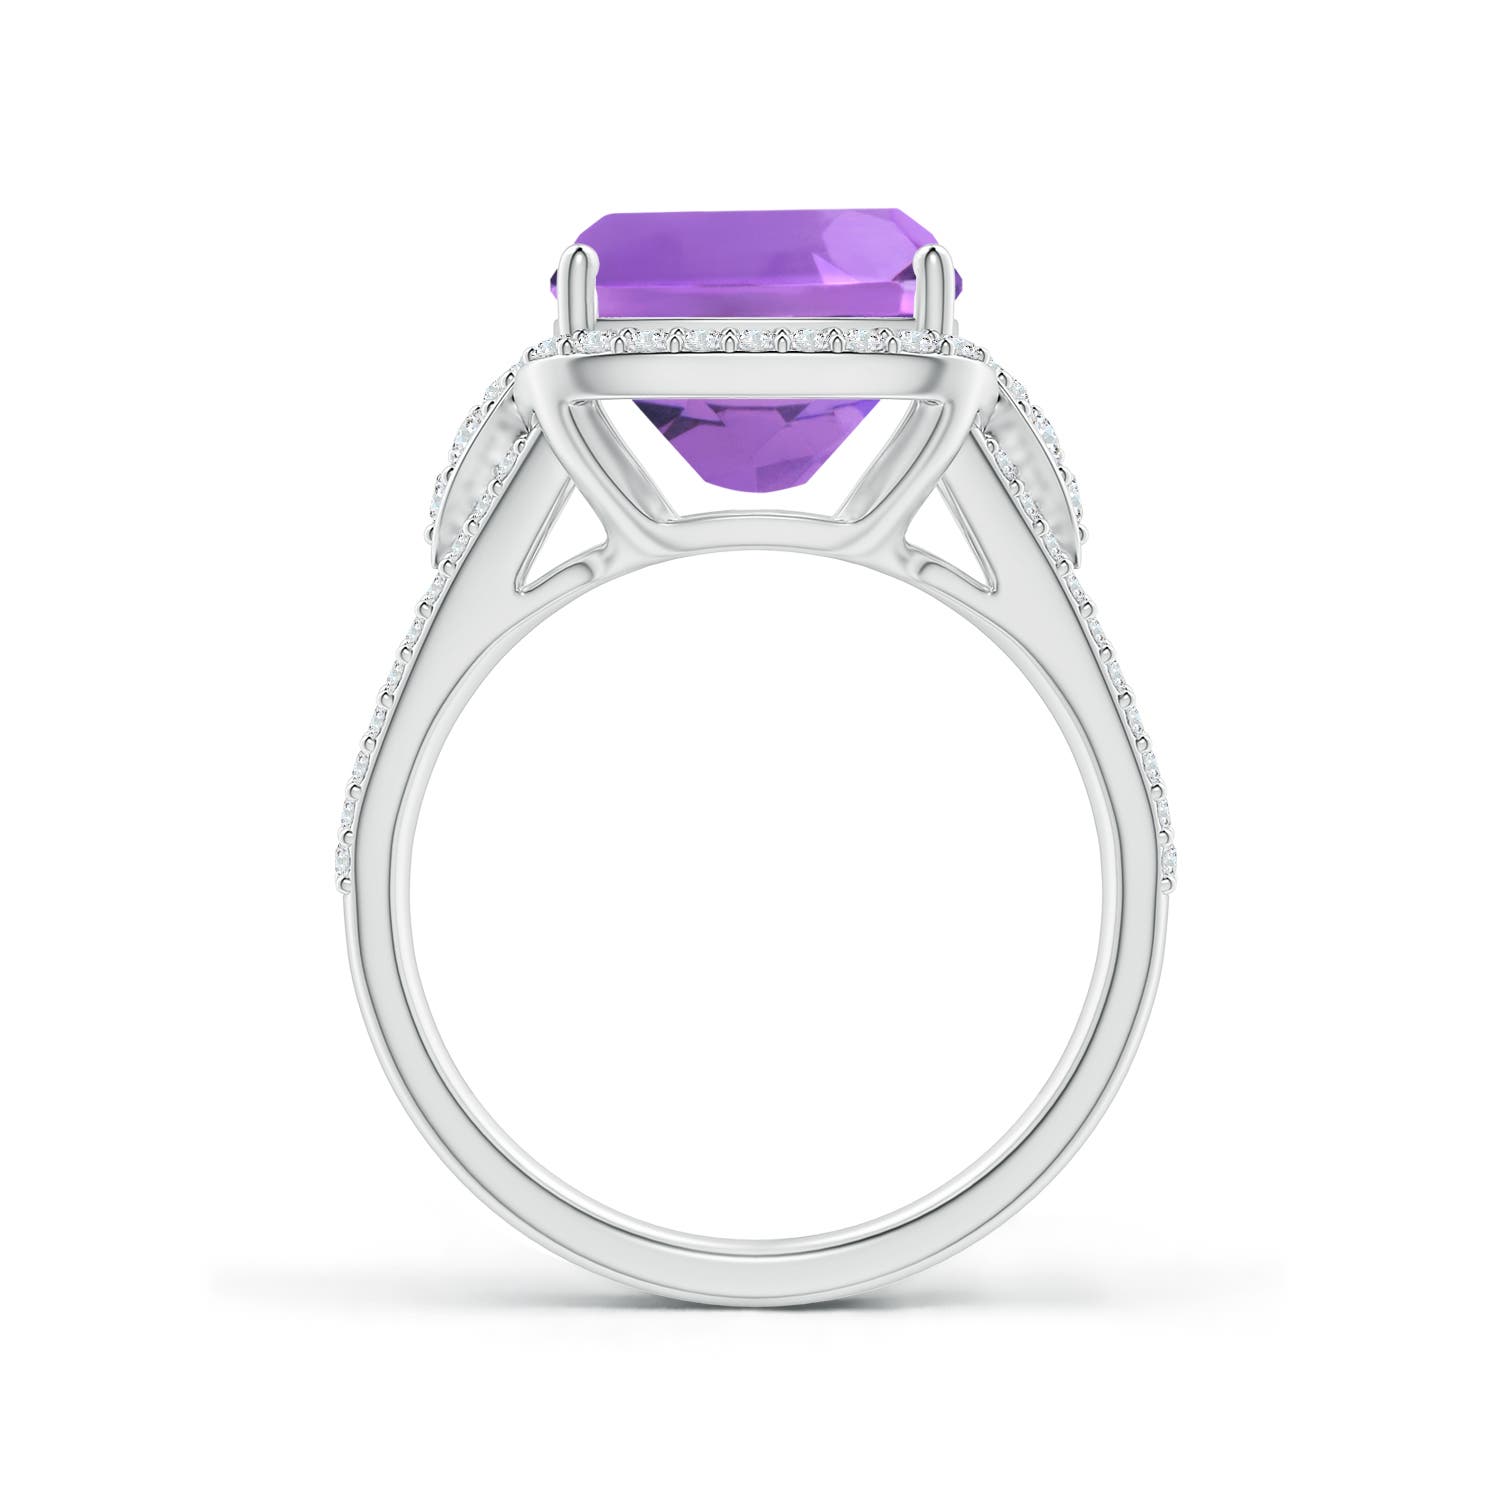 AA - Amethyst / 5.06 CT / 14 KT White Gold